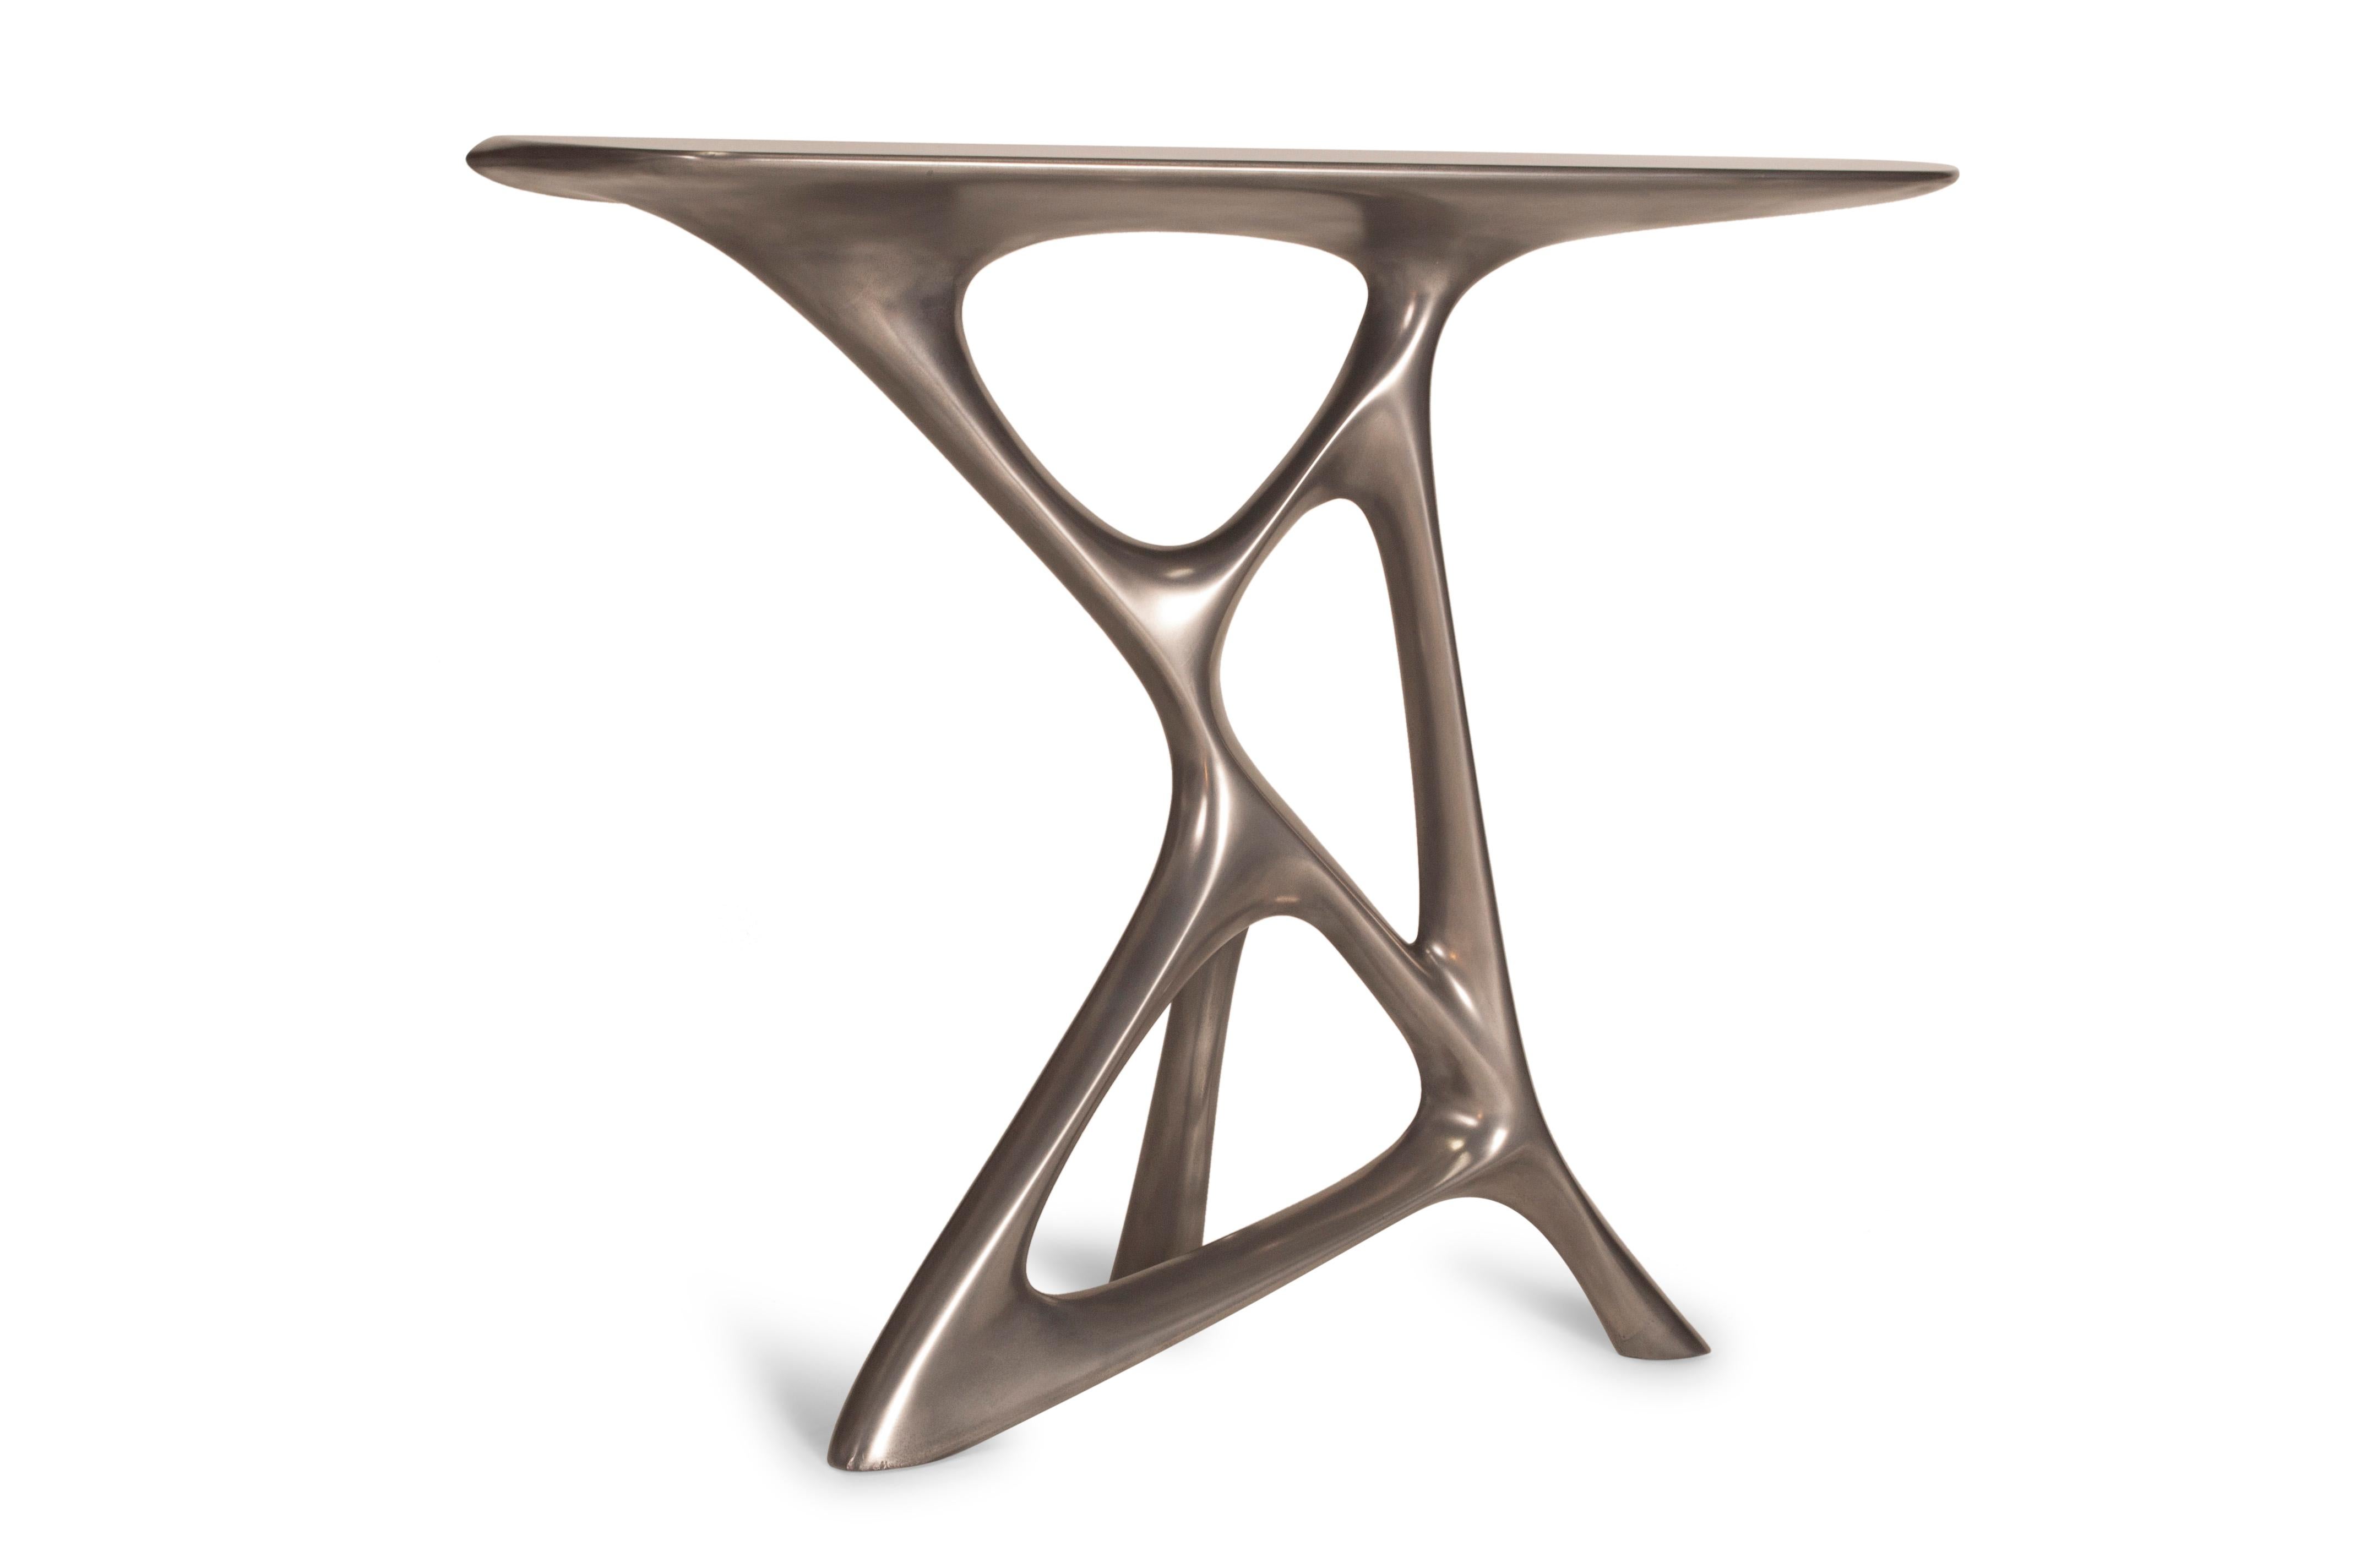 Amorph Anika console, stainless steel finish.

About Amorph: 
Amorph is a design and manufacturing company based in Los Angeles, California. We take pride in hand crafted designs connected to technology to create sophisticated, design driven